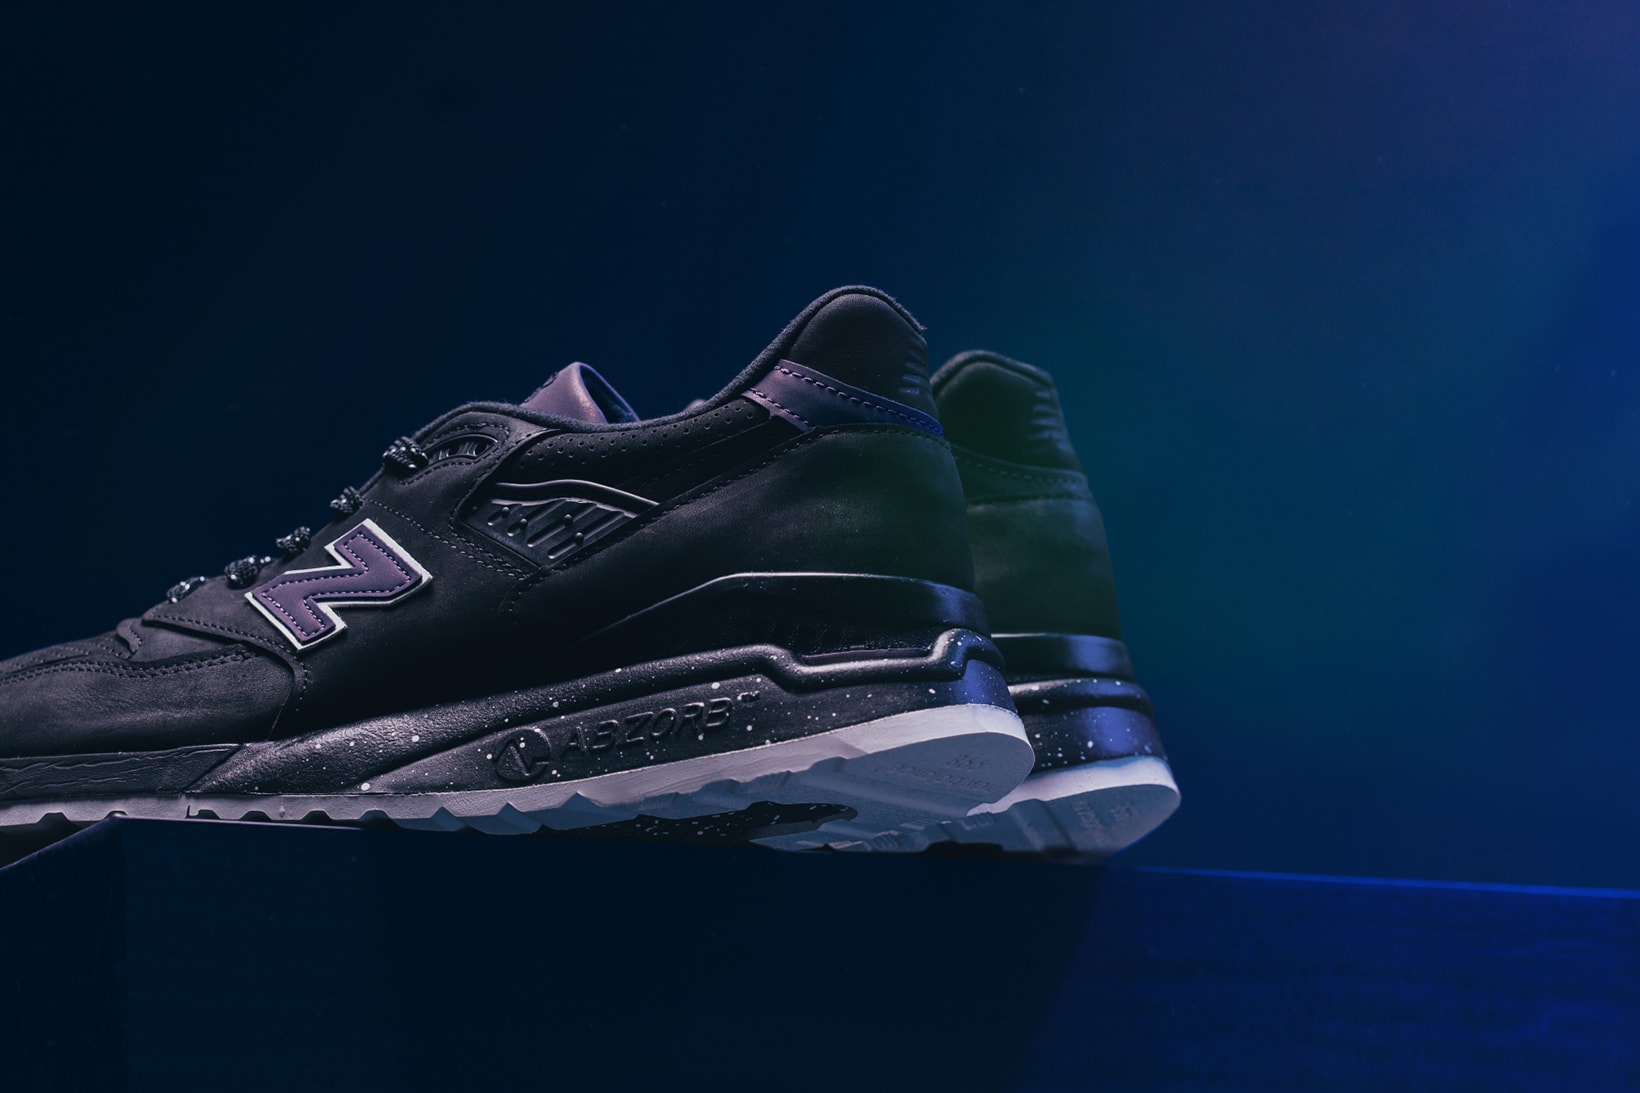 New Balance 998 Made in the USA Northern Lights Black 2017 October 31 Halloween Release Sneakers Shoes Footwear Feature 3M 2017